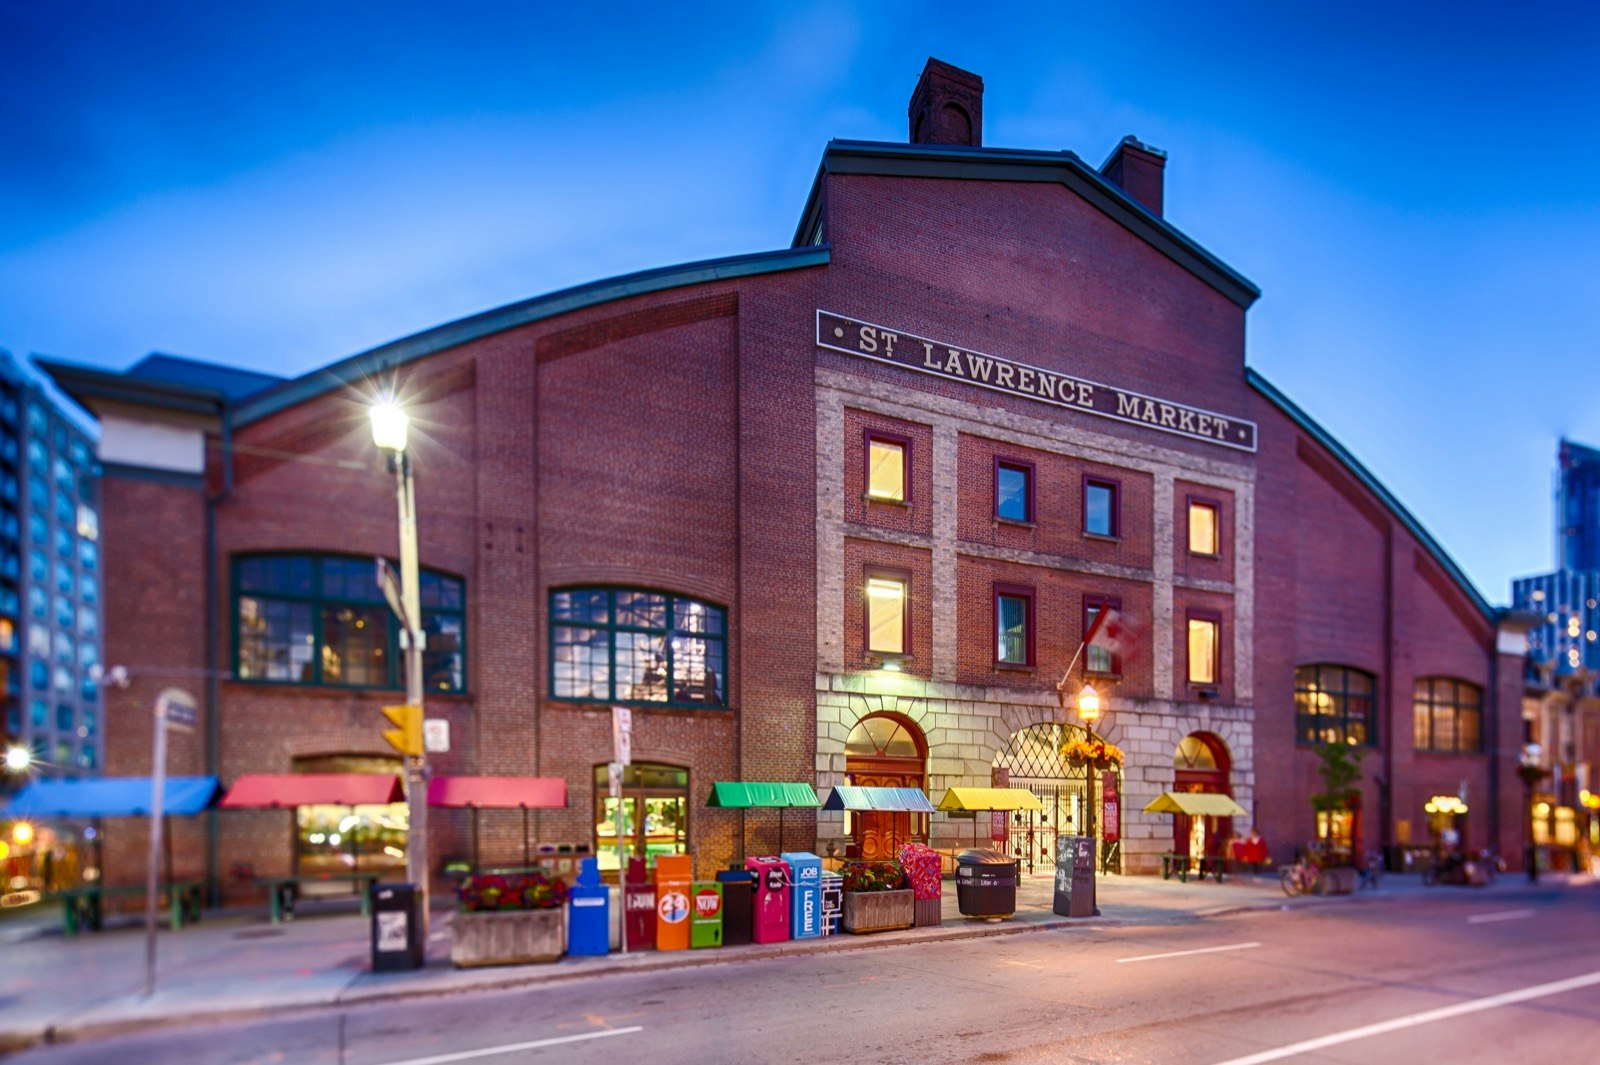 Lights glow at twilight around the giant brick facade of the St. Lawrence Market, one of two major markets in Toronto.